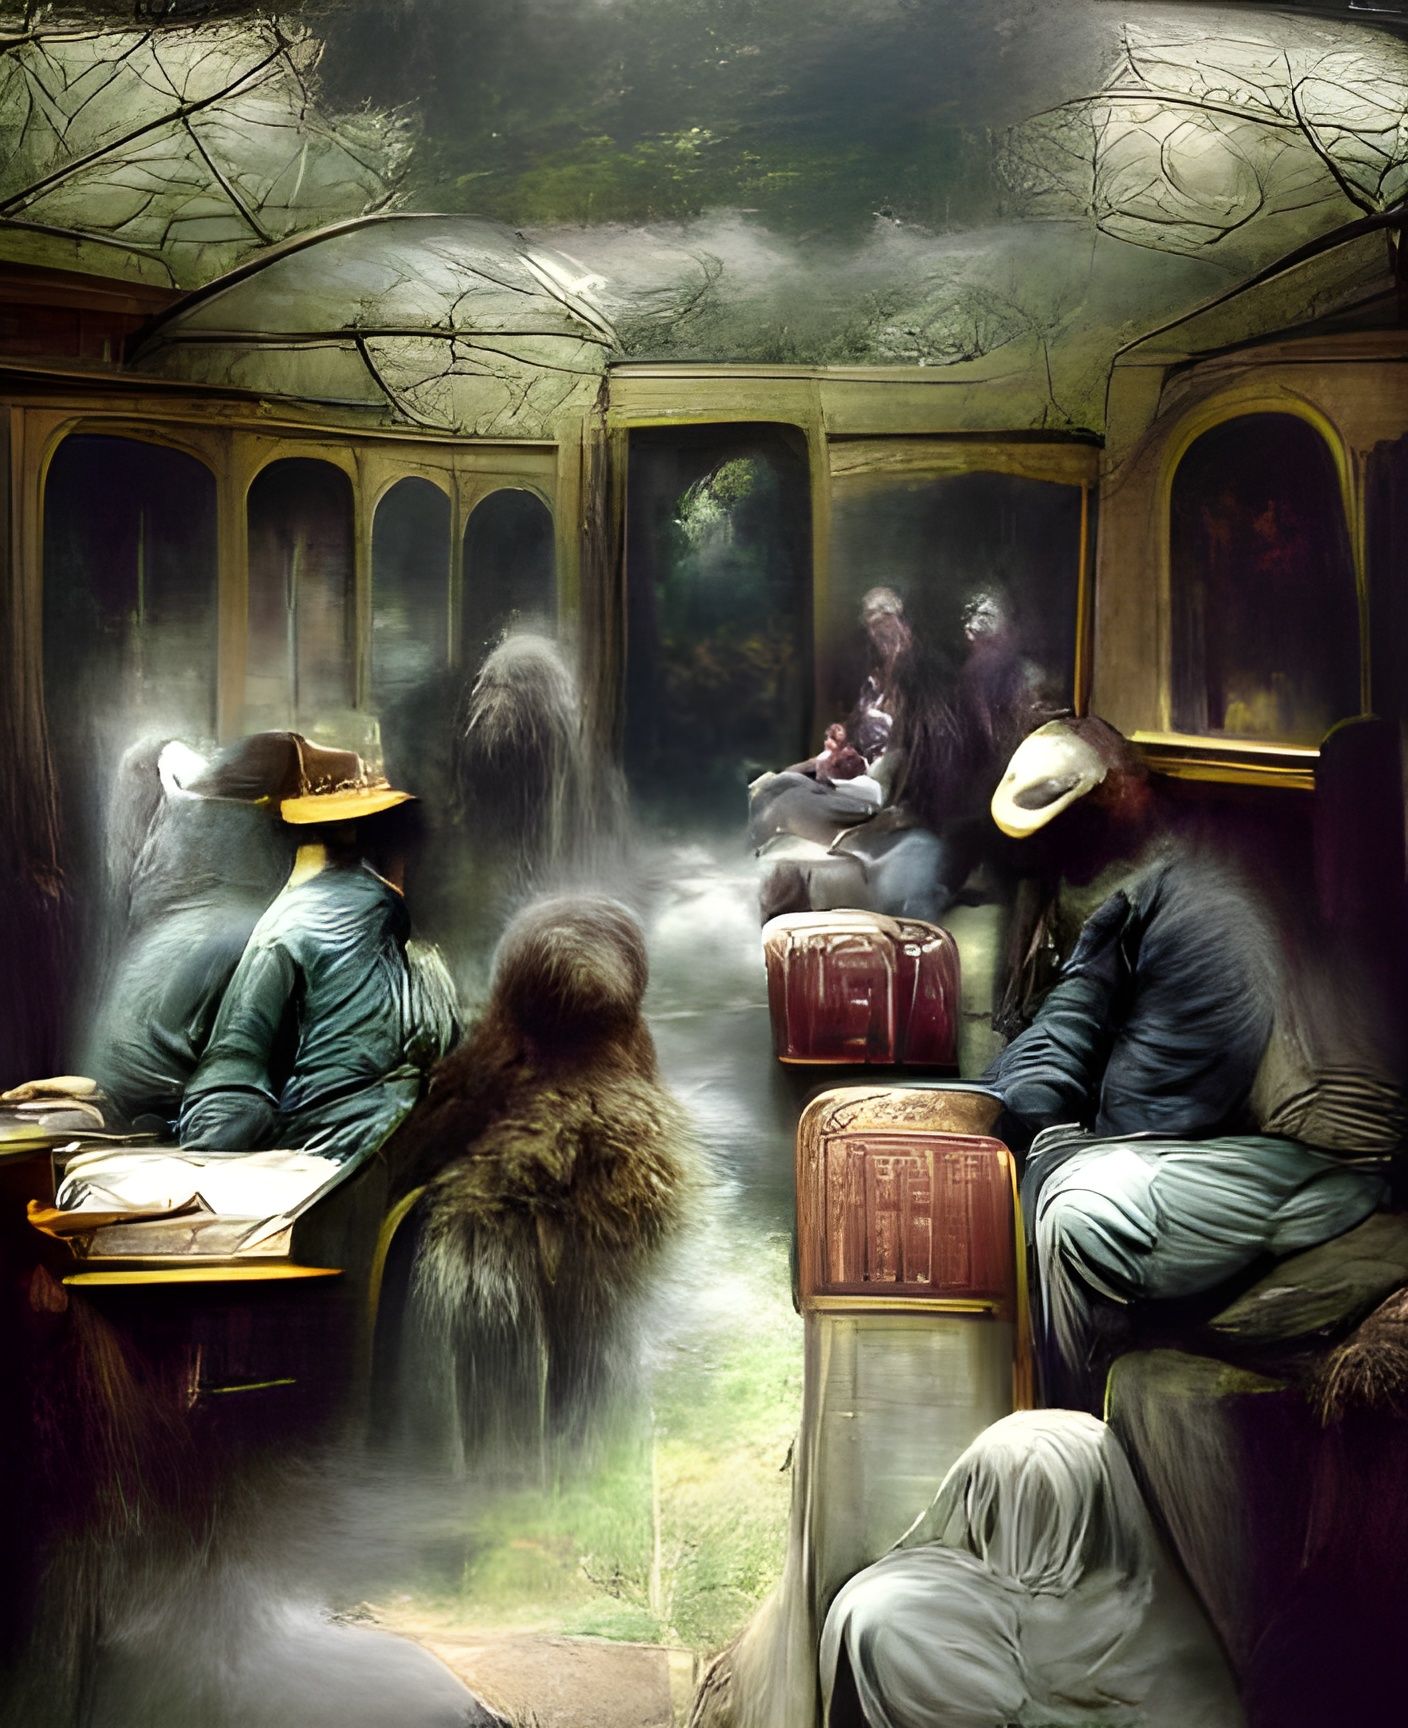 Ghostly travelers